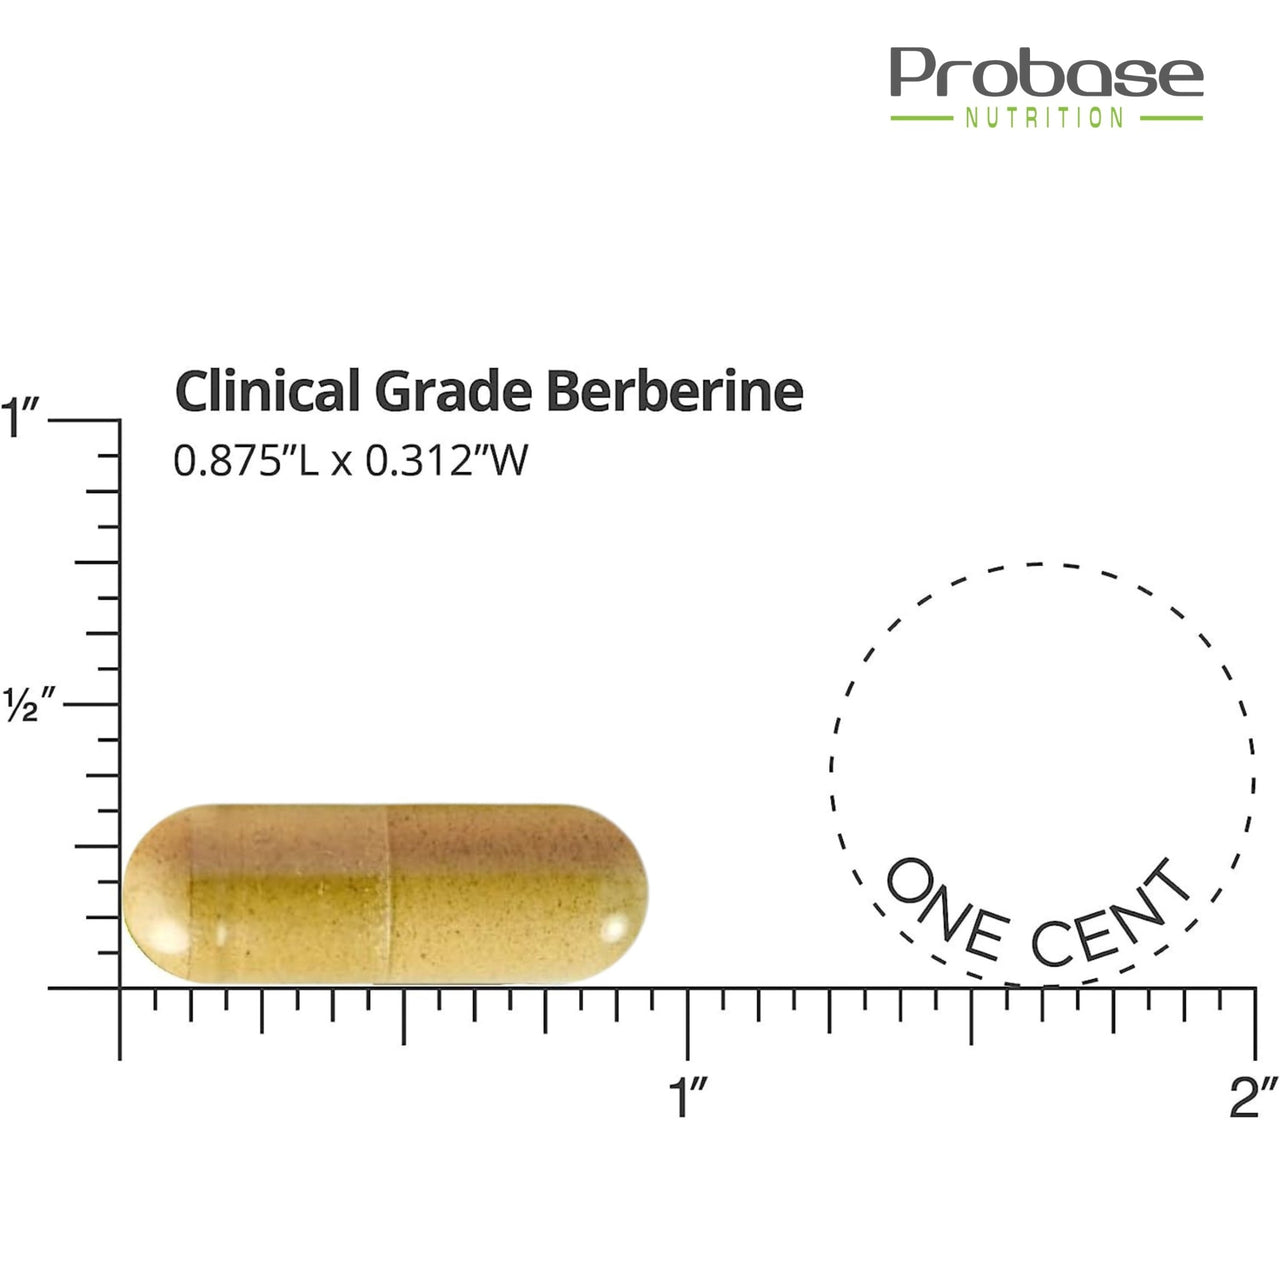 Probase Premium Berberine HCI 1200mg, 120 Capsules - Plus Ceylon Cinnamon Extract 10:1, Berberine HCL Root Supplements Pills - Supports Glucose Metabolism, Immune System, Healthy Weight Management - Probase Nutrition